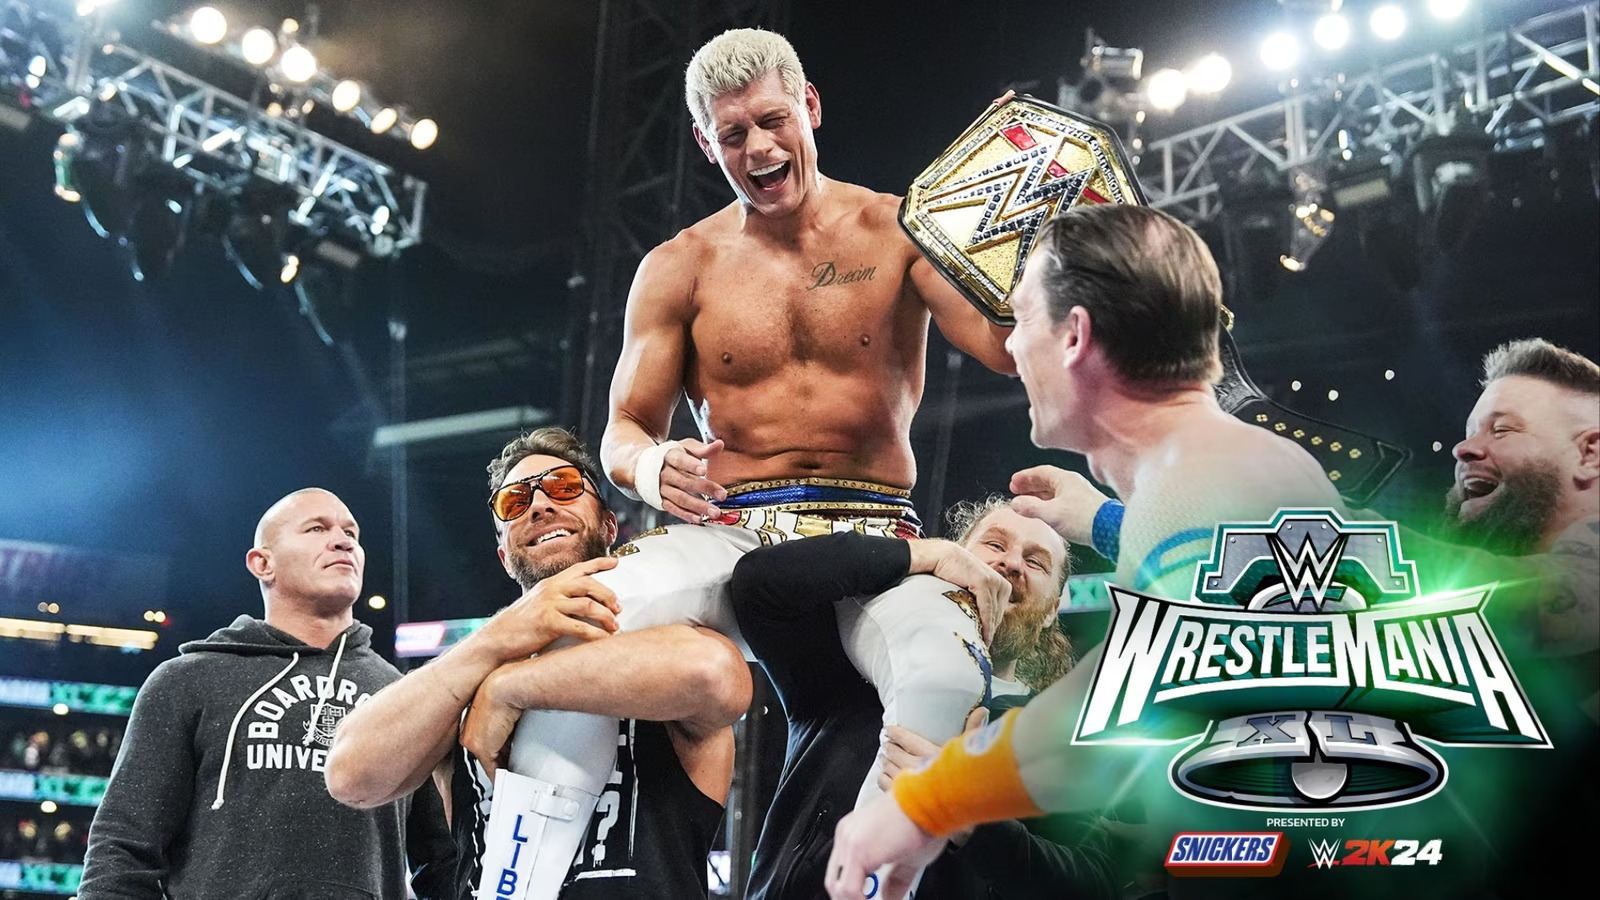 Cody Rhodes described the peak of his exhilarating moments as making eye contact with John Cena prior to his victory at WrestleMania 40.